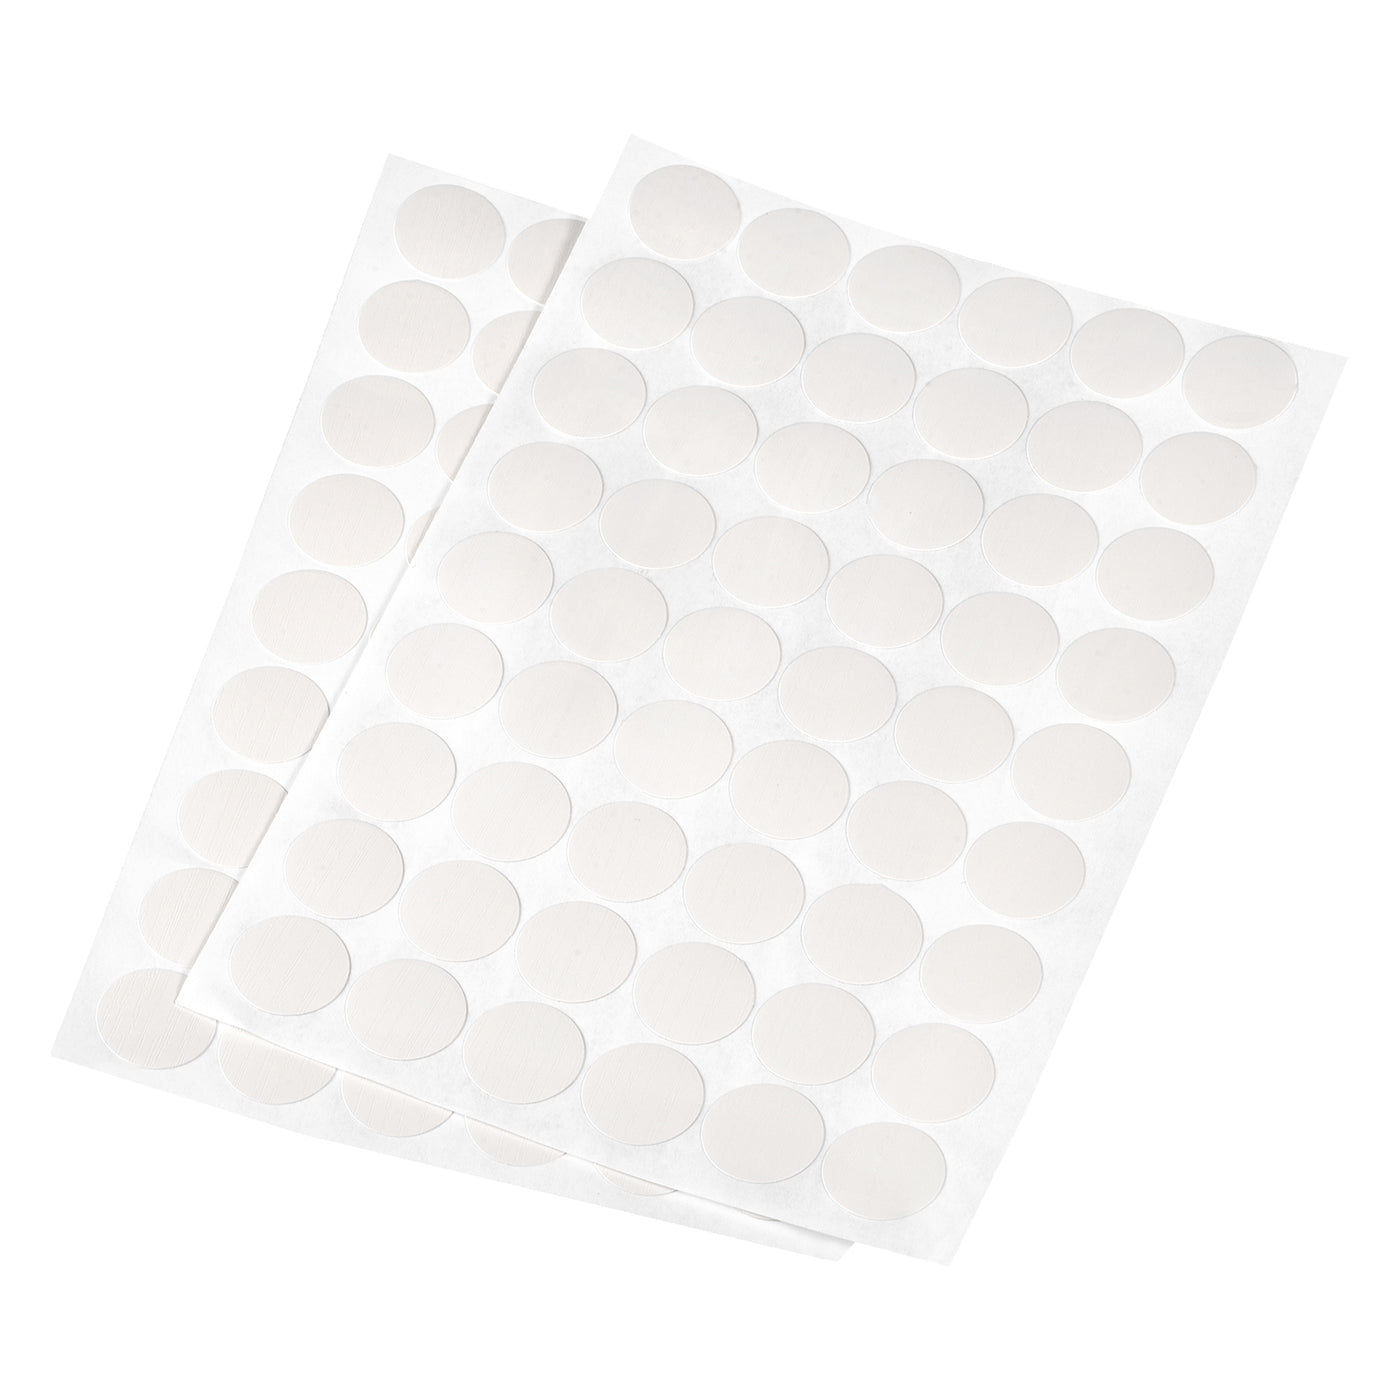 uxcell Uxcell Screw Hole Cover Stickers, 21mm Dia PVC Self Adhesive Covers Caps for Wood Furniture Cabinet Shelf Wardrobe, White Line 4 Sheet/216pcs